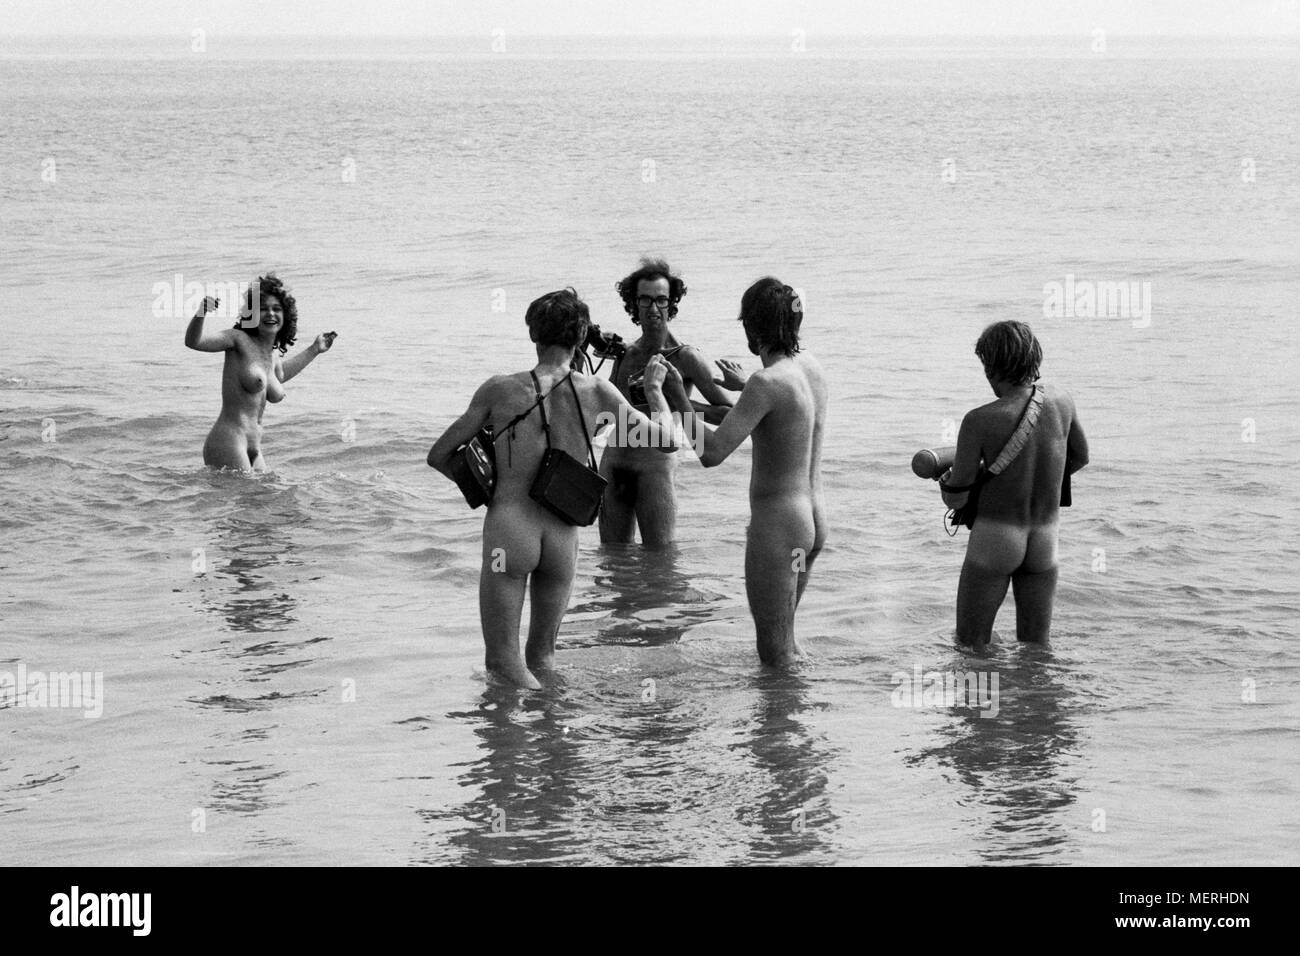 A TV crew at the 1970 Isle of Wight pop festival,  filming hippies skinny dipping in Freshwater Bay for a news report. Hippy guards had ordered all members of the press wanting access to the bay to strip naked themselves before filming or photographing, which the bravest members of the media cheerfully did. Stock Photo